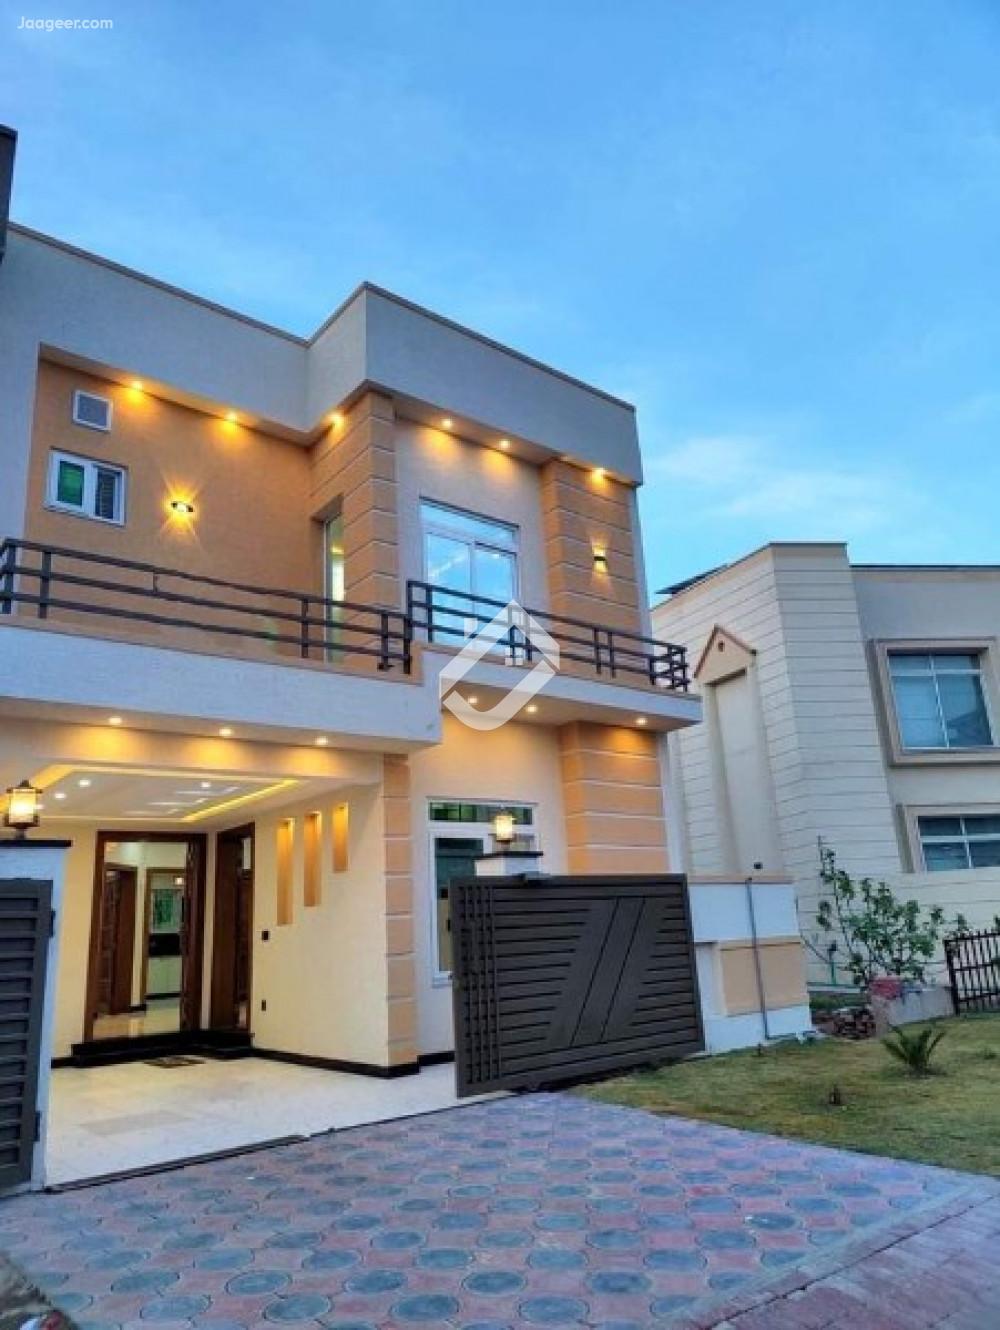 View  7 Marla Double Storey Designer House For Sale In Bahria Town Phase-8  in Bahria Town Phase-8, Rawalpindi